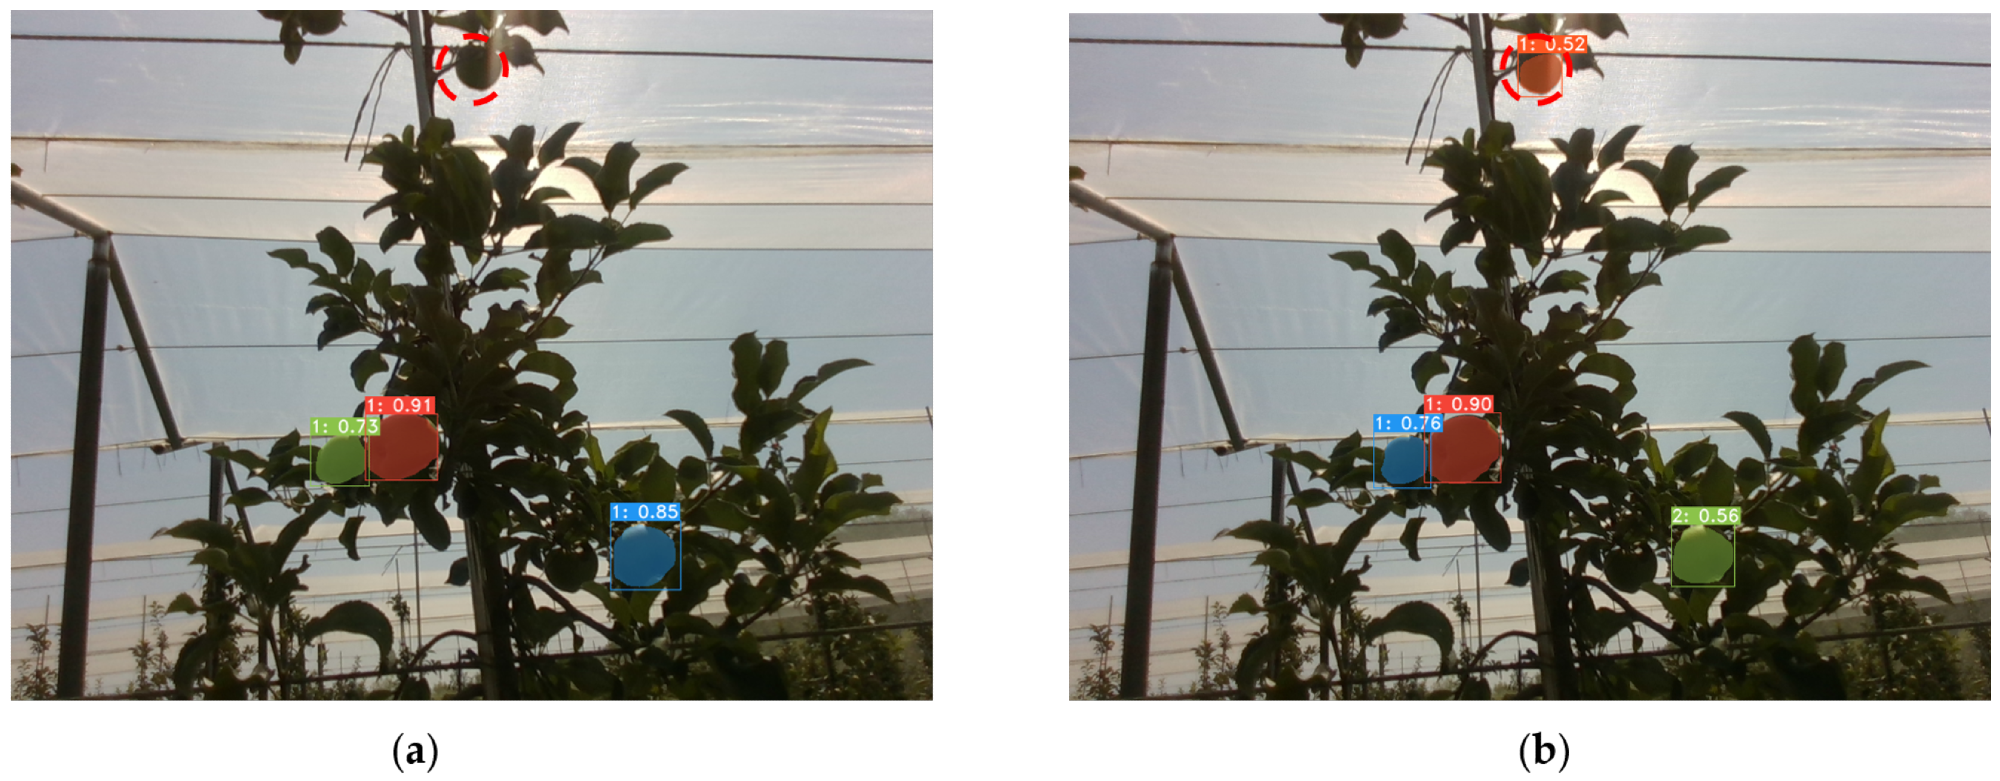 Performance of the detection and segmentation of YOLACT++ network in back lighting in sunny conditions. (a) ResNet-50; (b) ResNet-101.